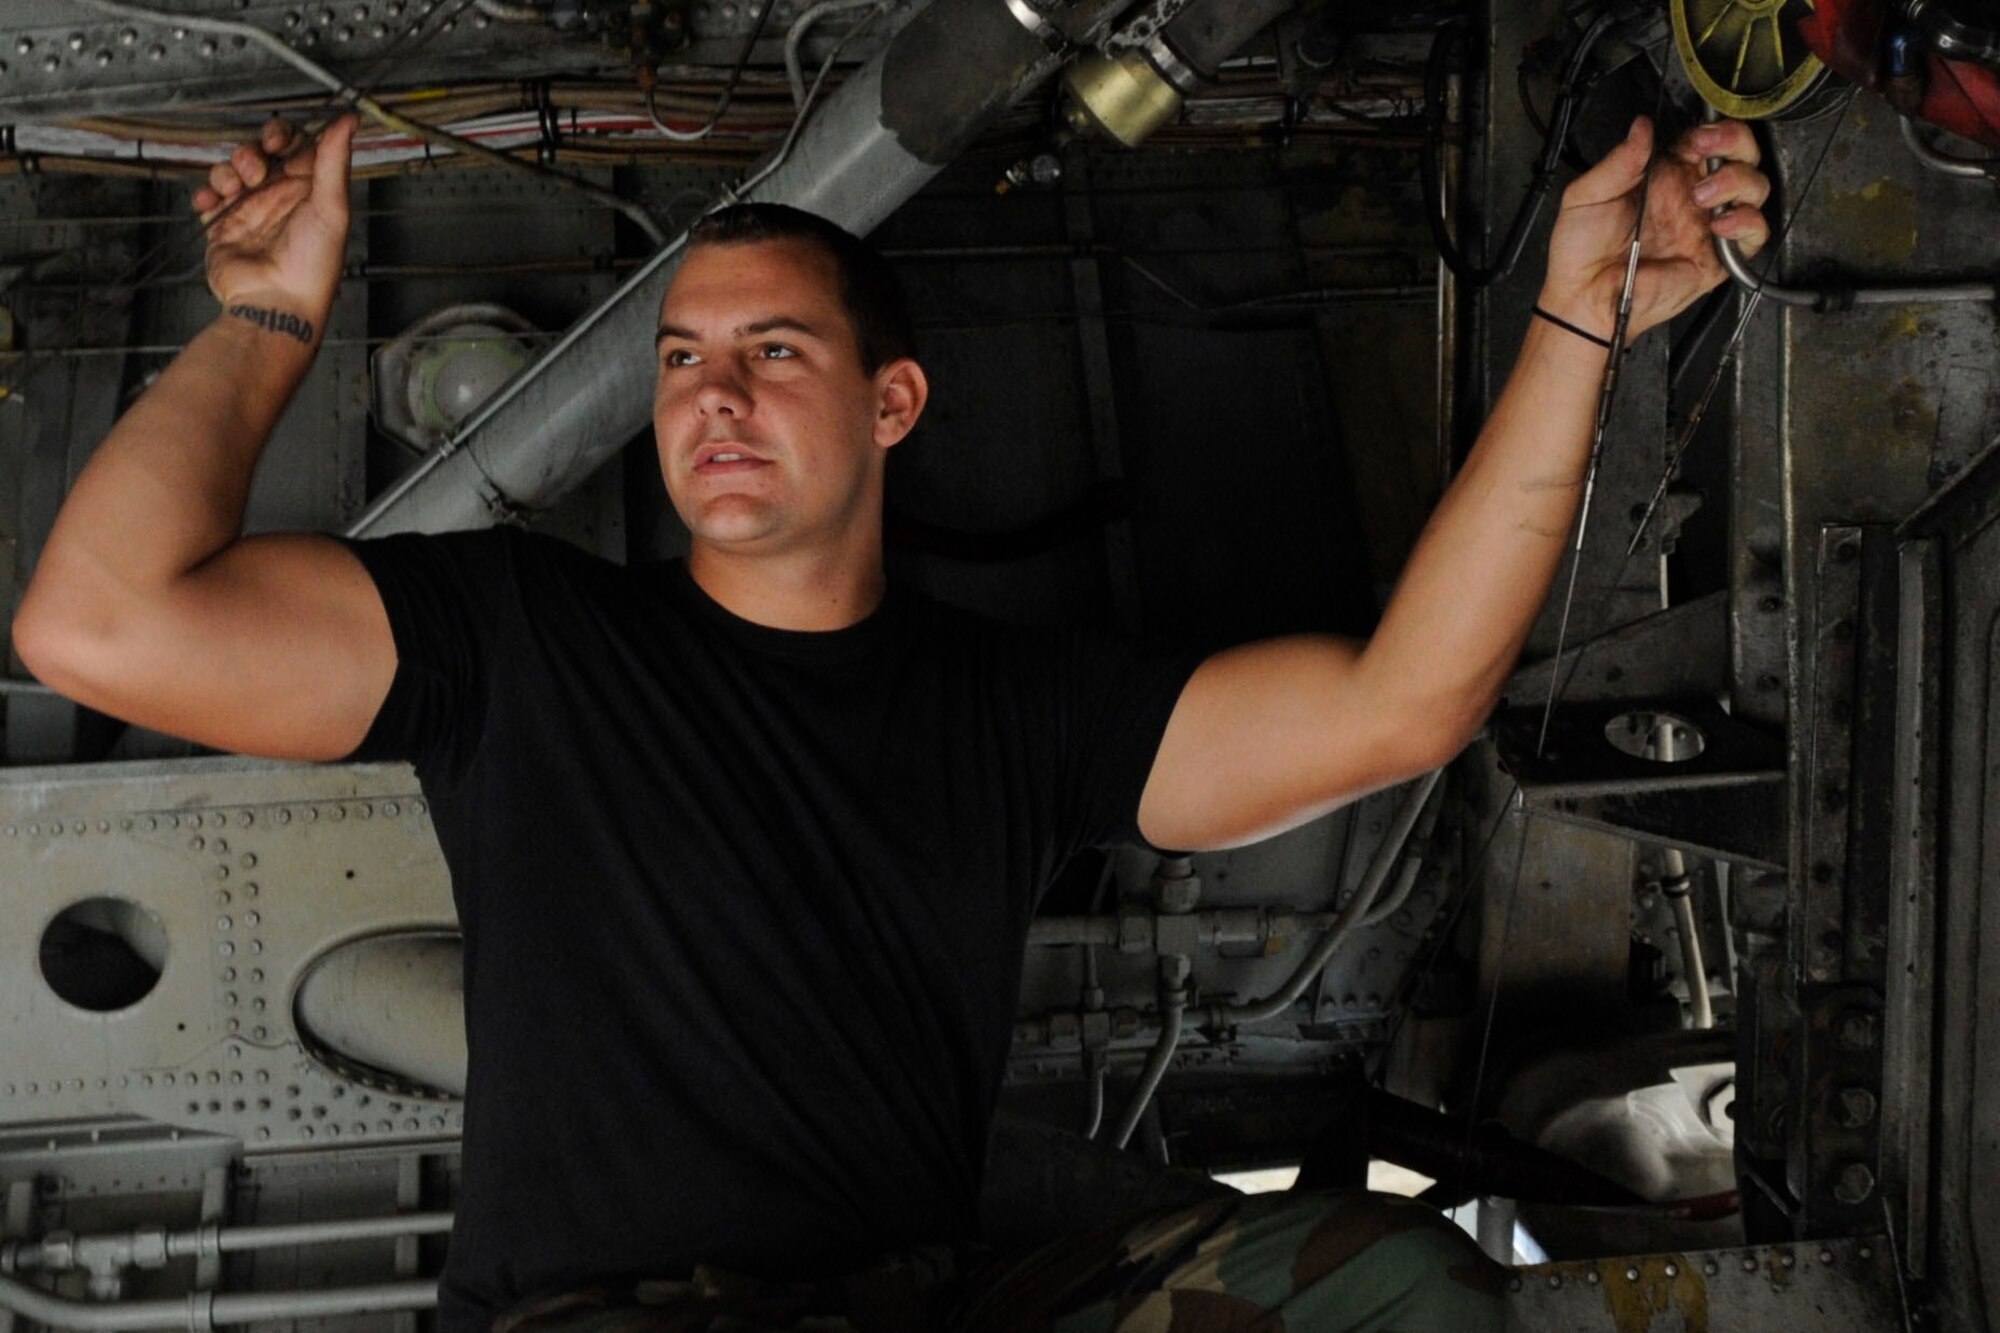 BARKSDALE AIR FORCE BASE, La. -- Senior Airman Bradly Bowen, 20th Bomb Squadron dedicated crew chief, tests the security of the landing gear wires on a B-52H. Airman Bowen won the Thomas N. Barnes Crew Chief of the Year Award in 2009 at base level. (U.S. Air Force photo by Senior Airman Megan M. Kittler) (RELEASED)